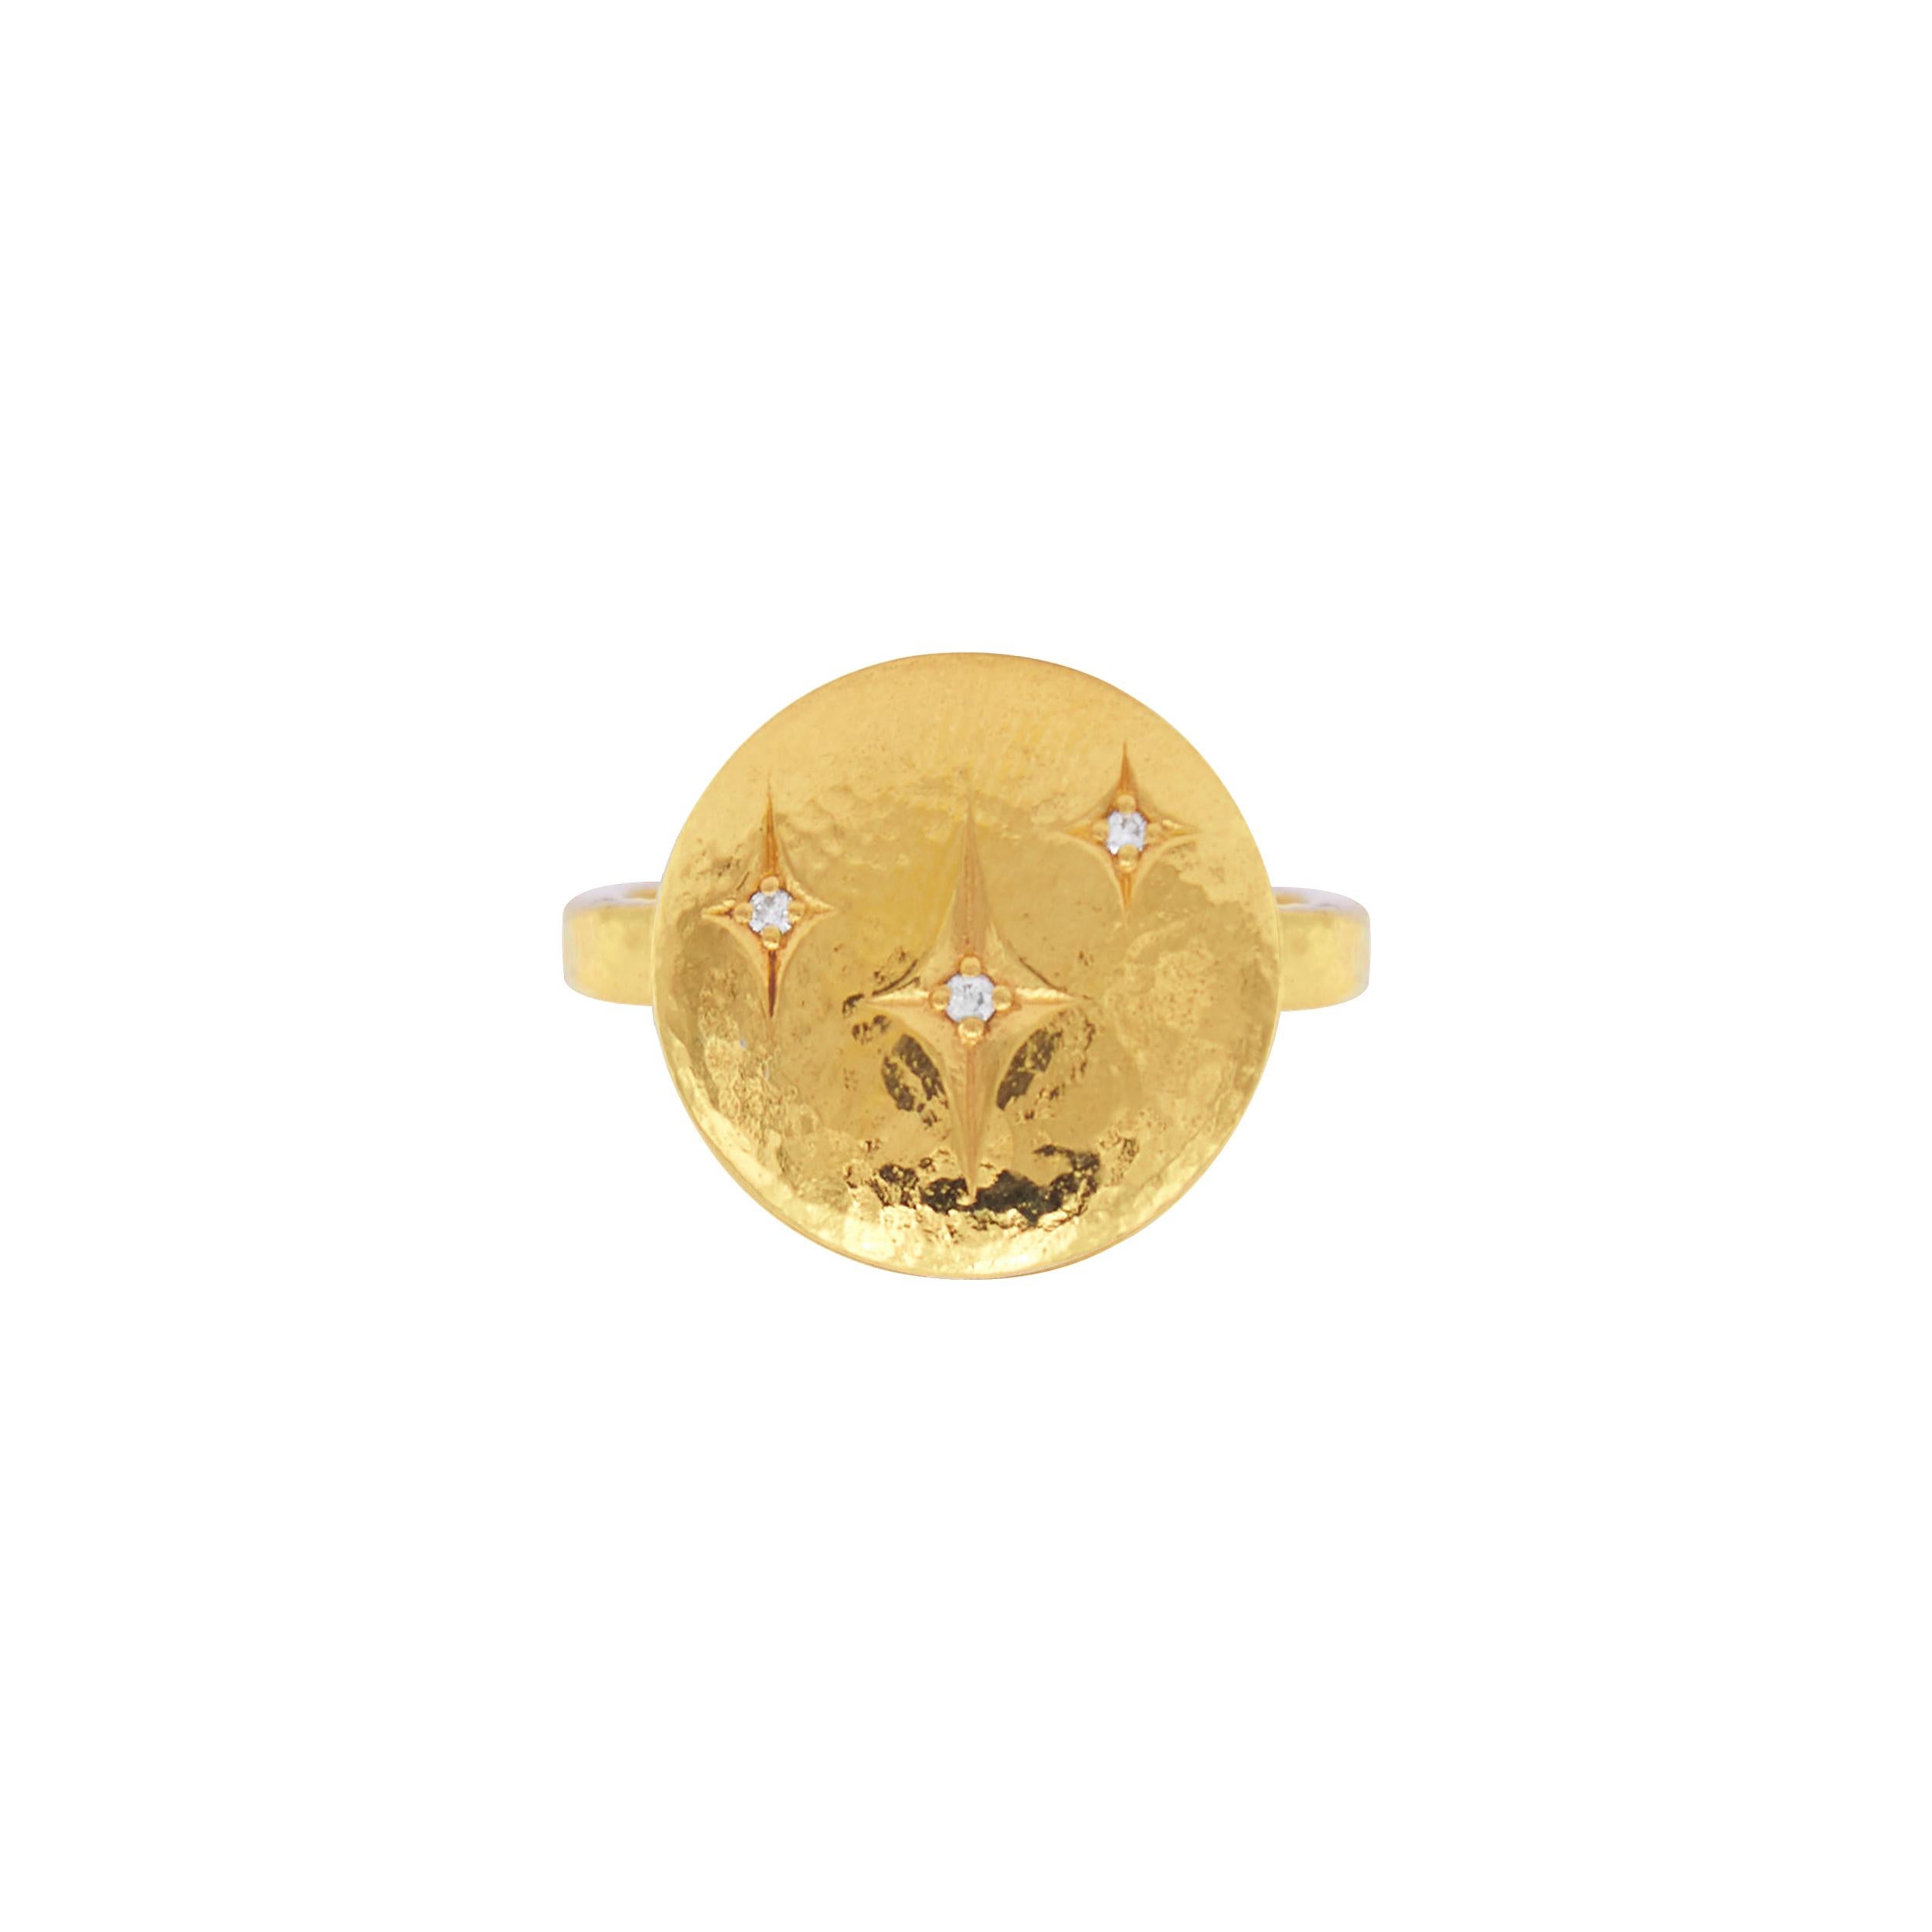 GURHAN hammered 22 Karat solid yellow gold and diamond Starlight cocktail ring featuring (3) 1.30-1.60mm brilliant white diamonds, 0.04cts. 4mm shank, size 7. 